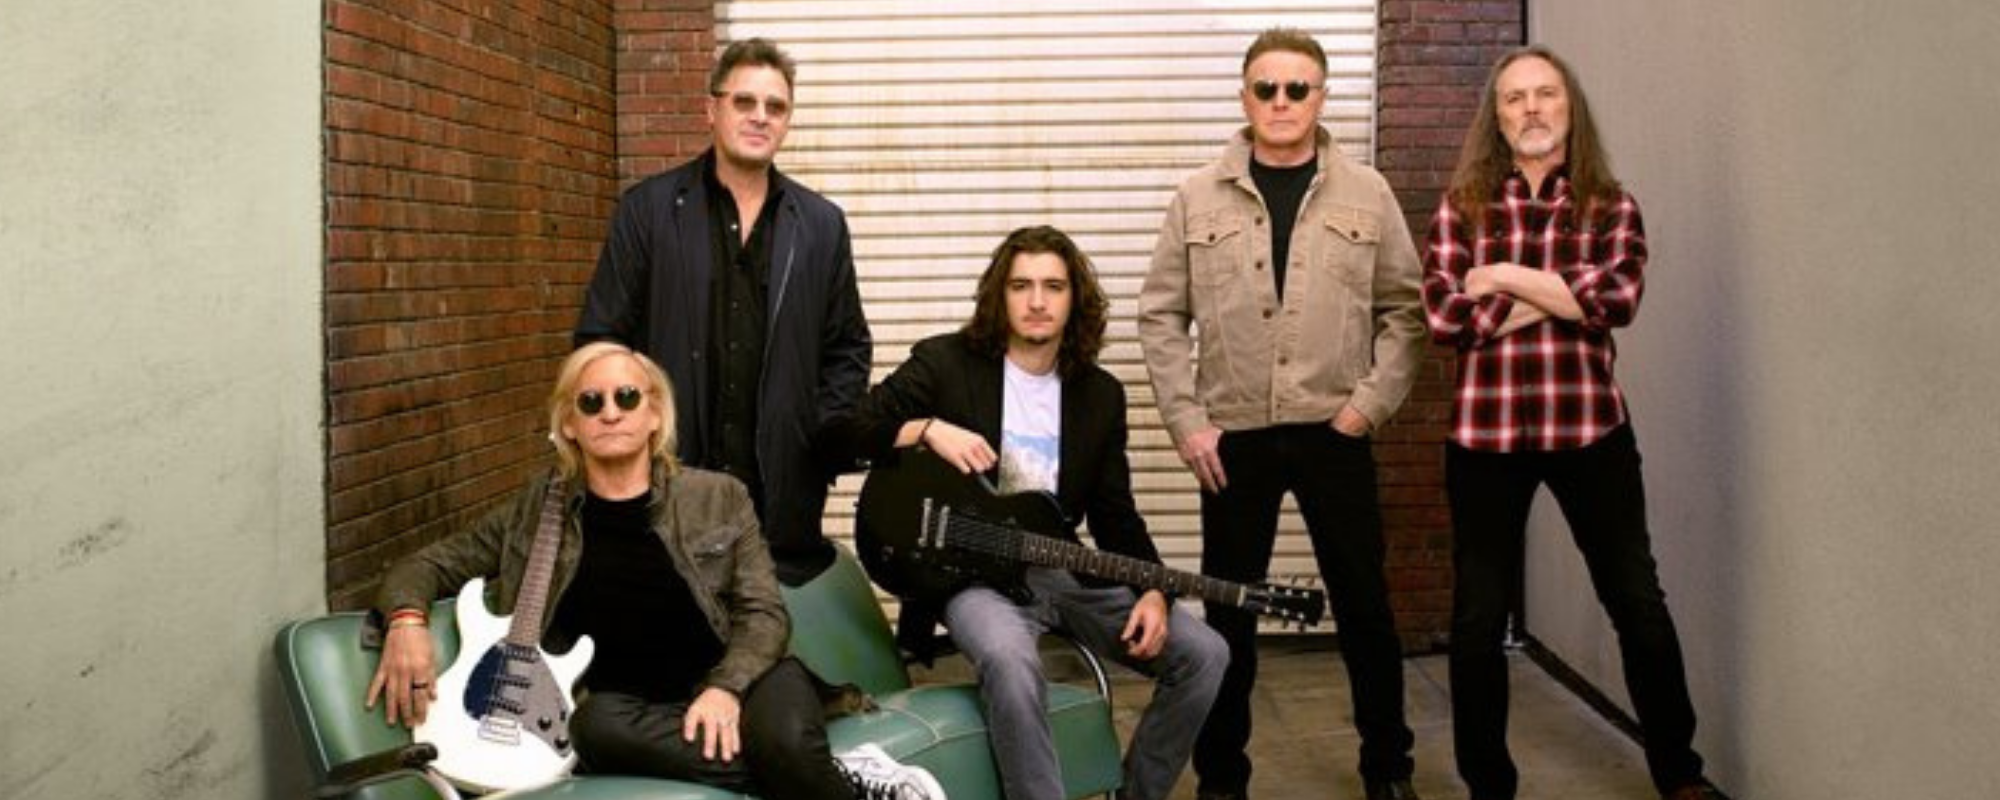 The Eagles Add More East Coast Dates to Rescheduled ‘Hotel California’ Tour